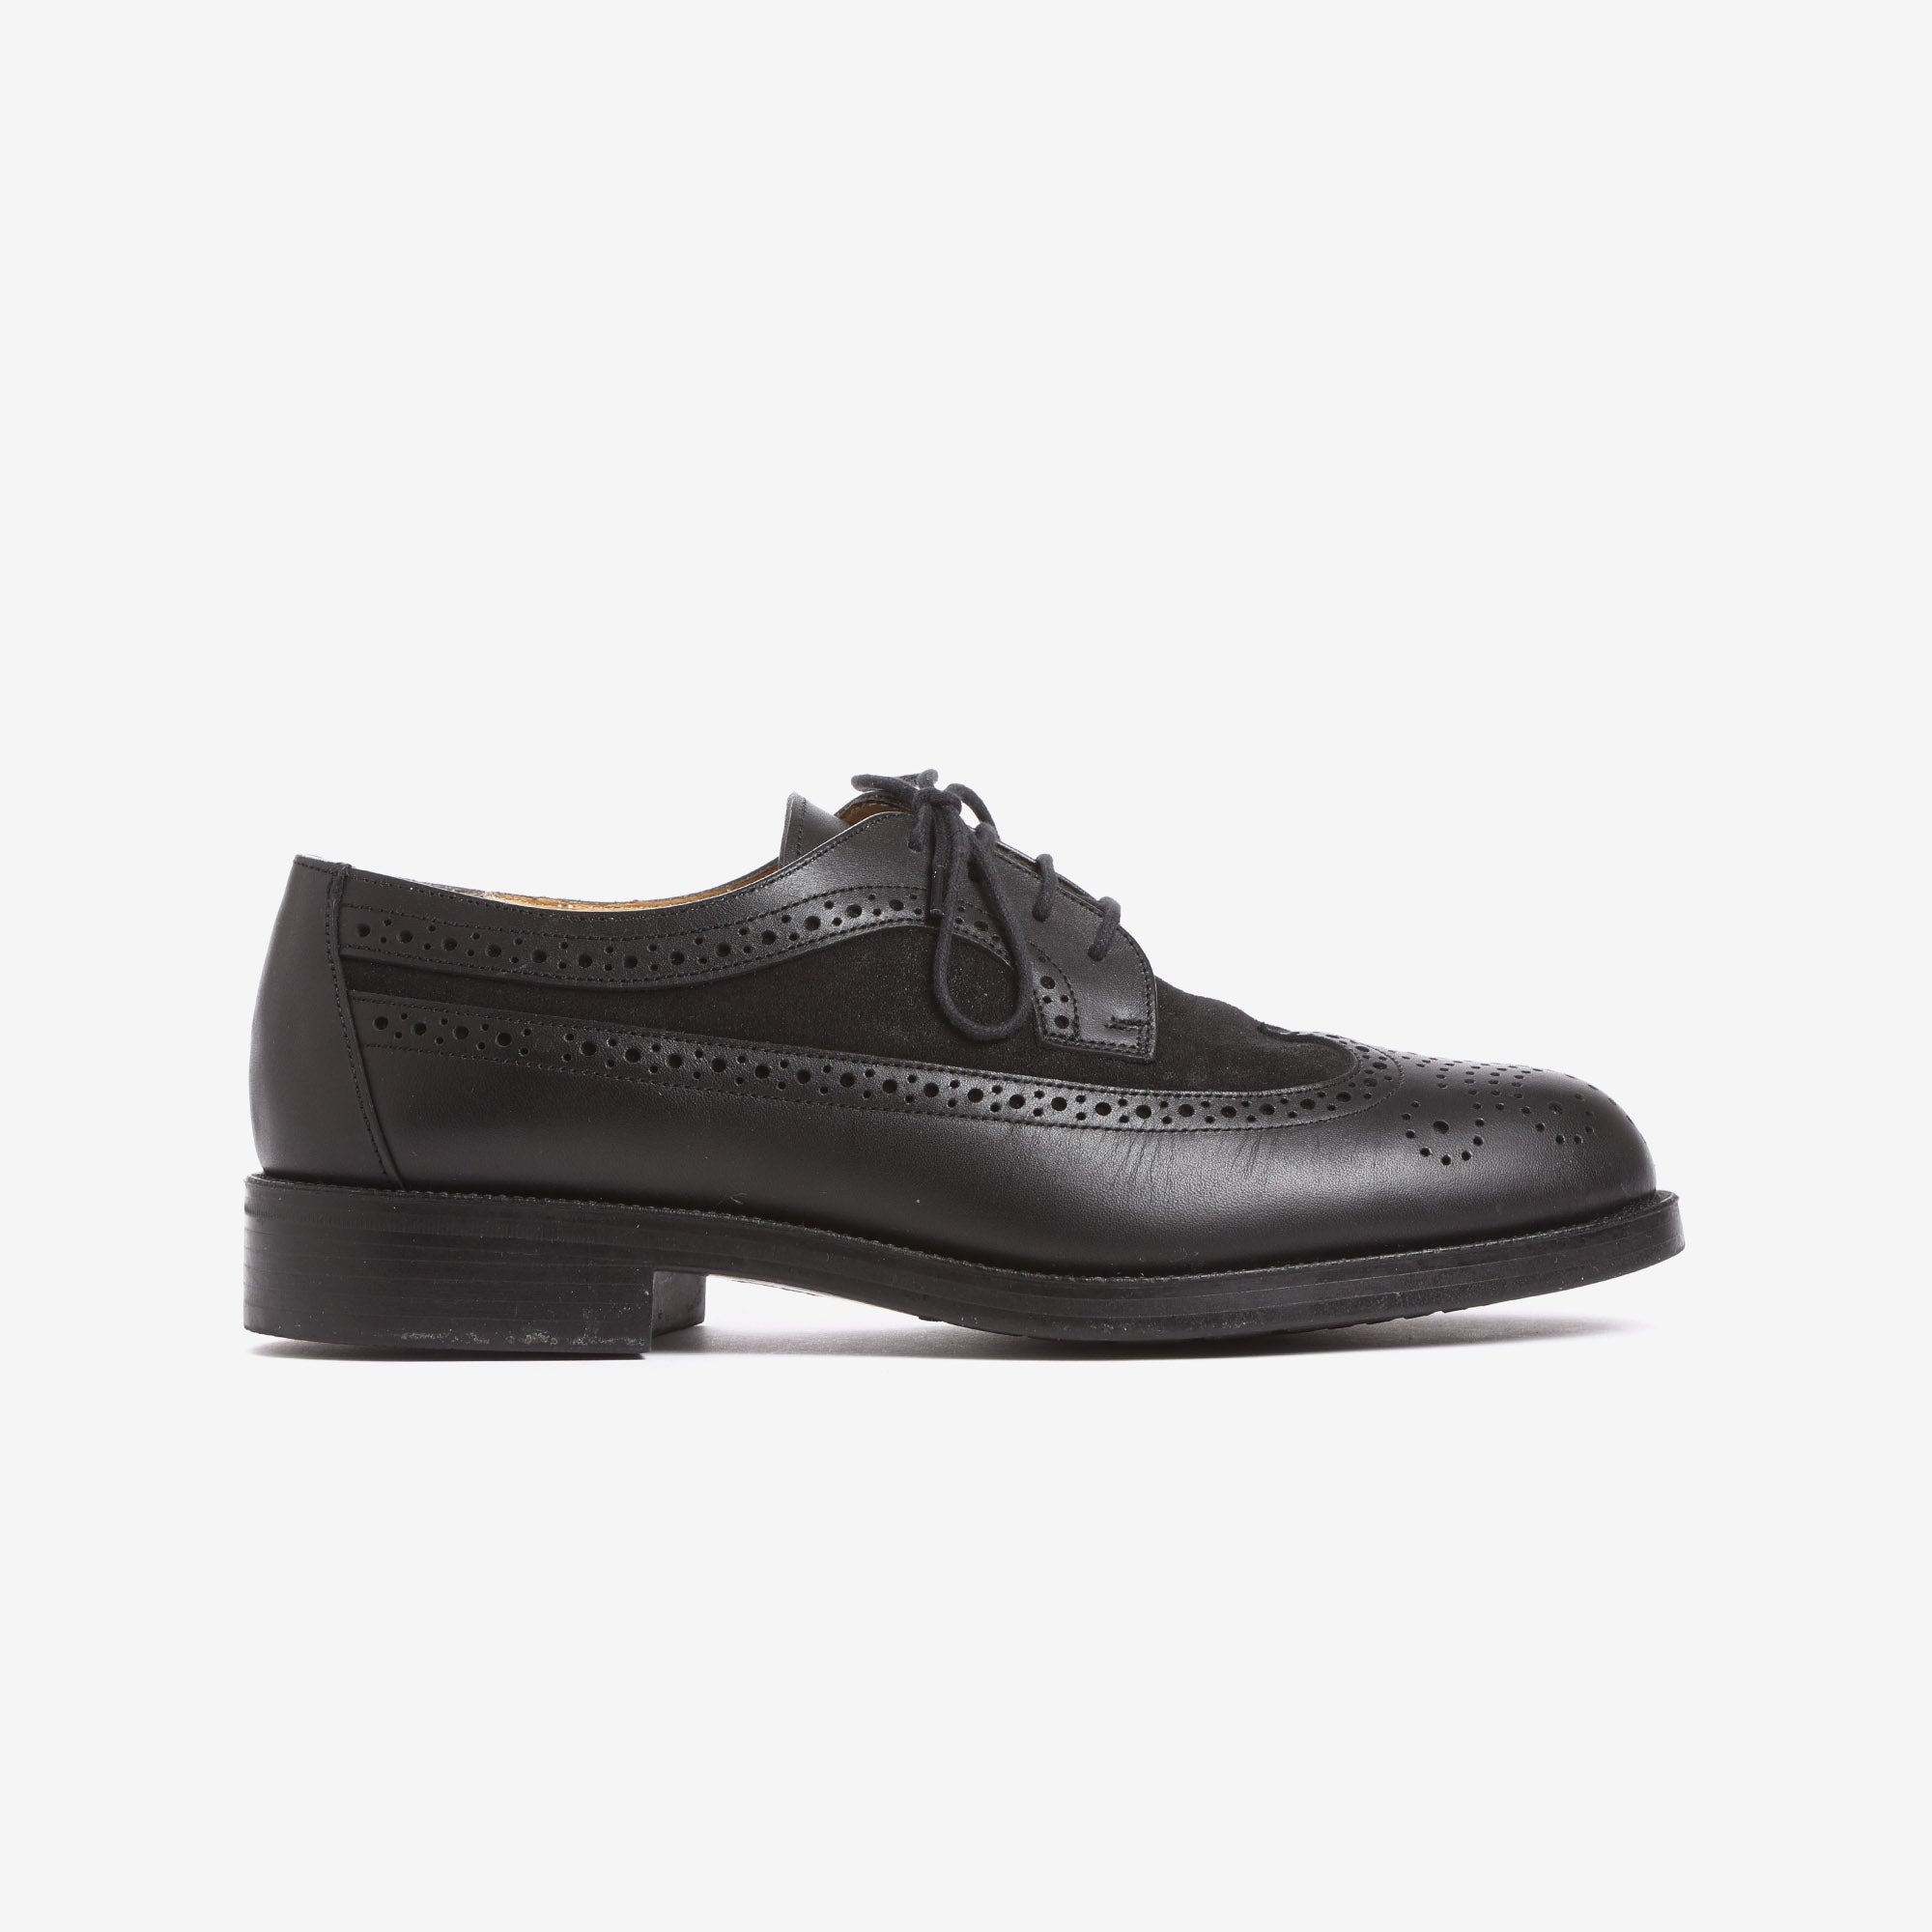 Suede & Leather Brogues